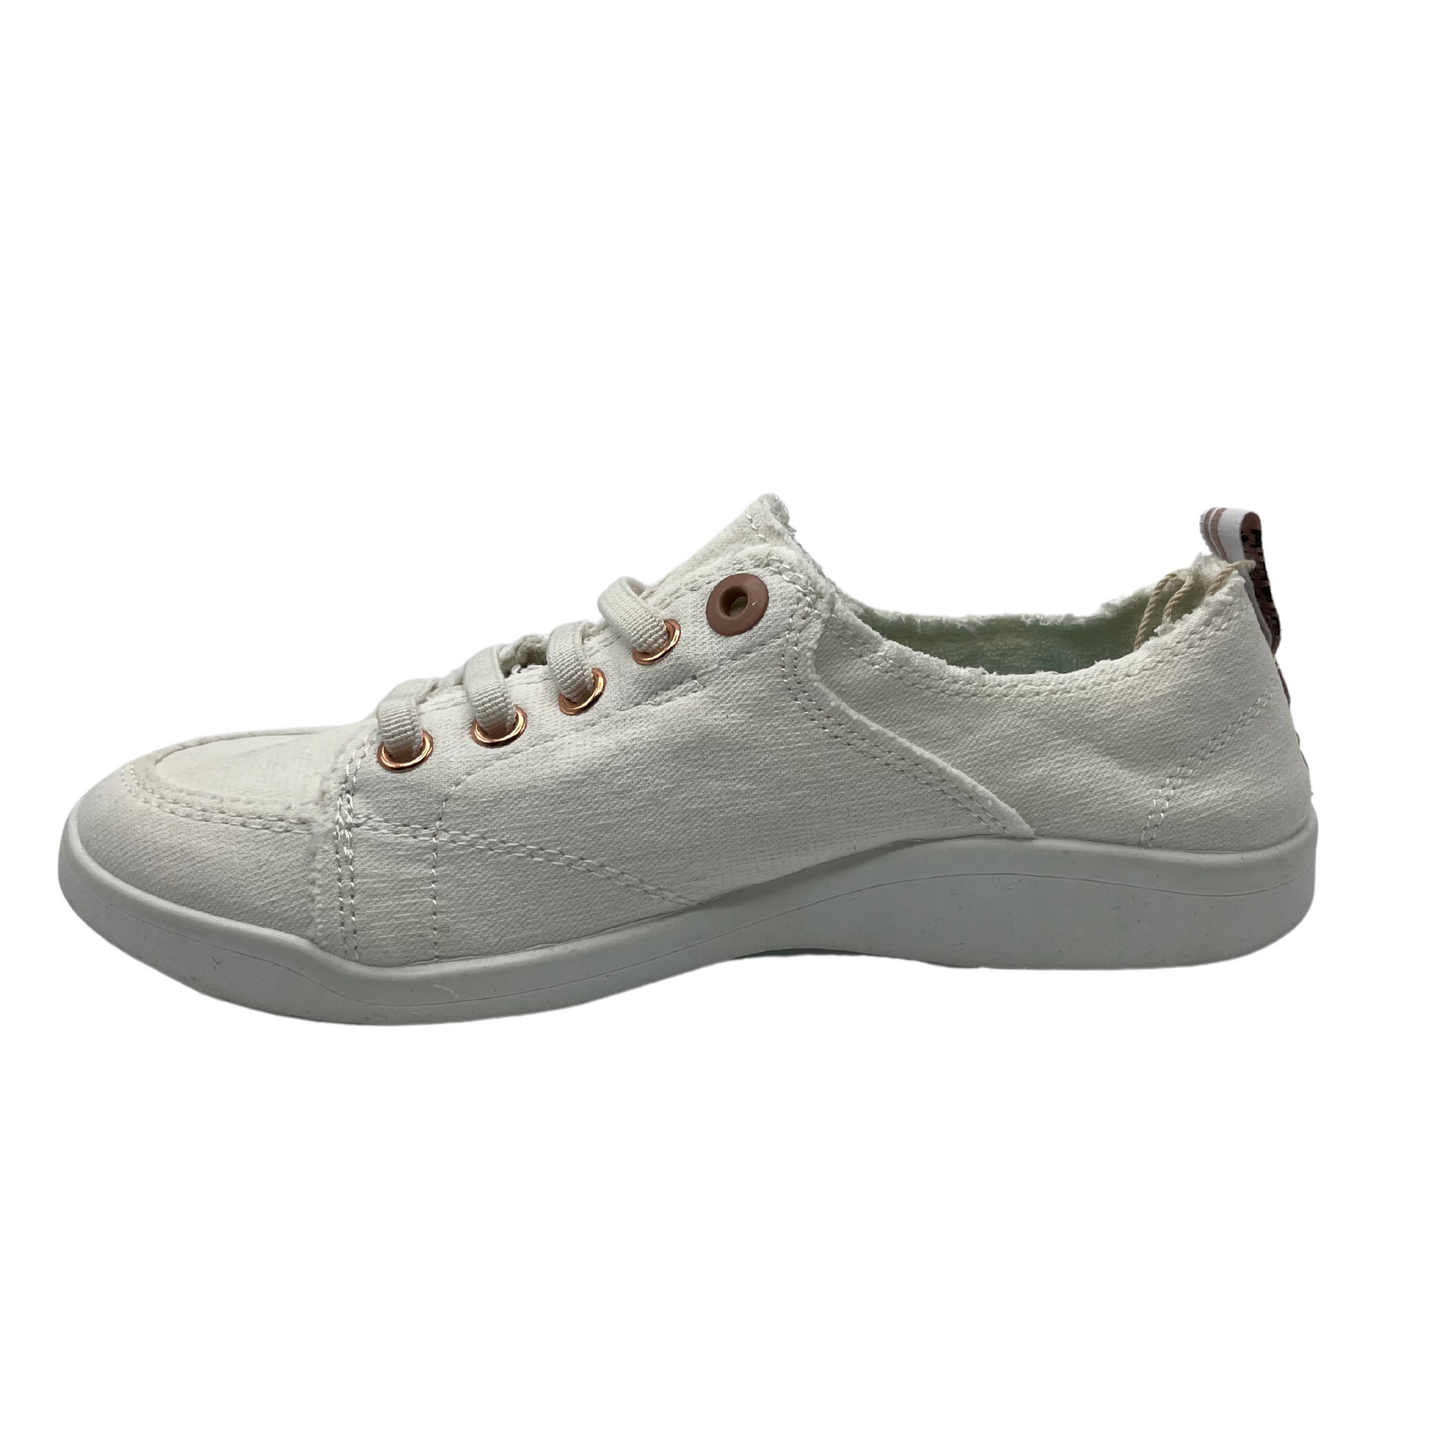 Left facing view of white canvas shoe with white rubber outsole and white laces